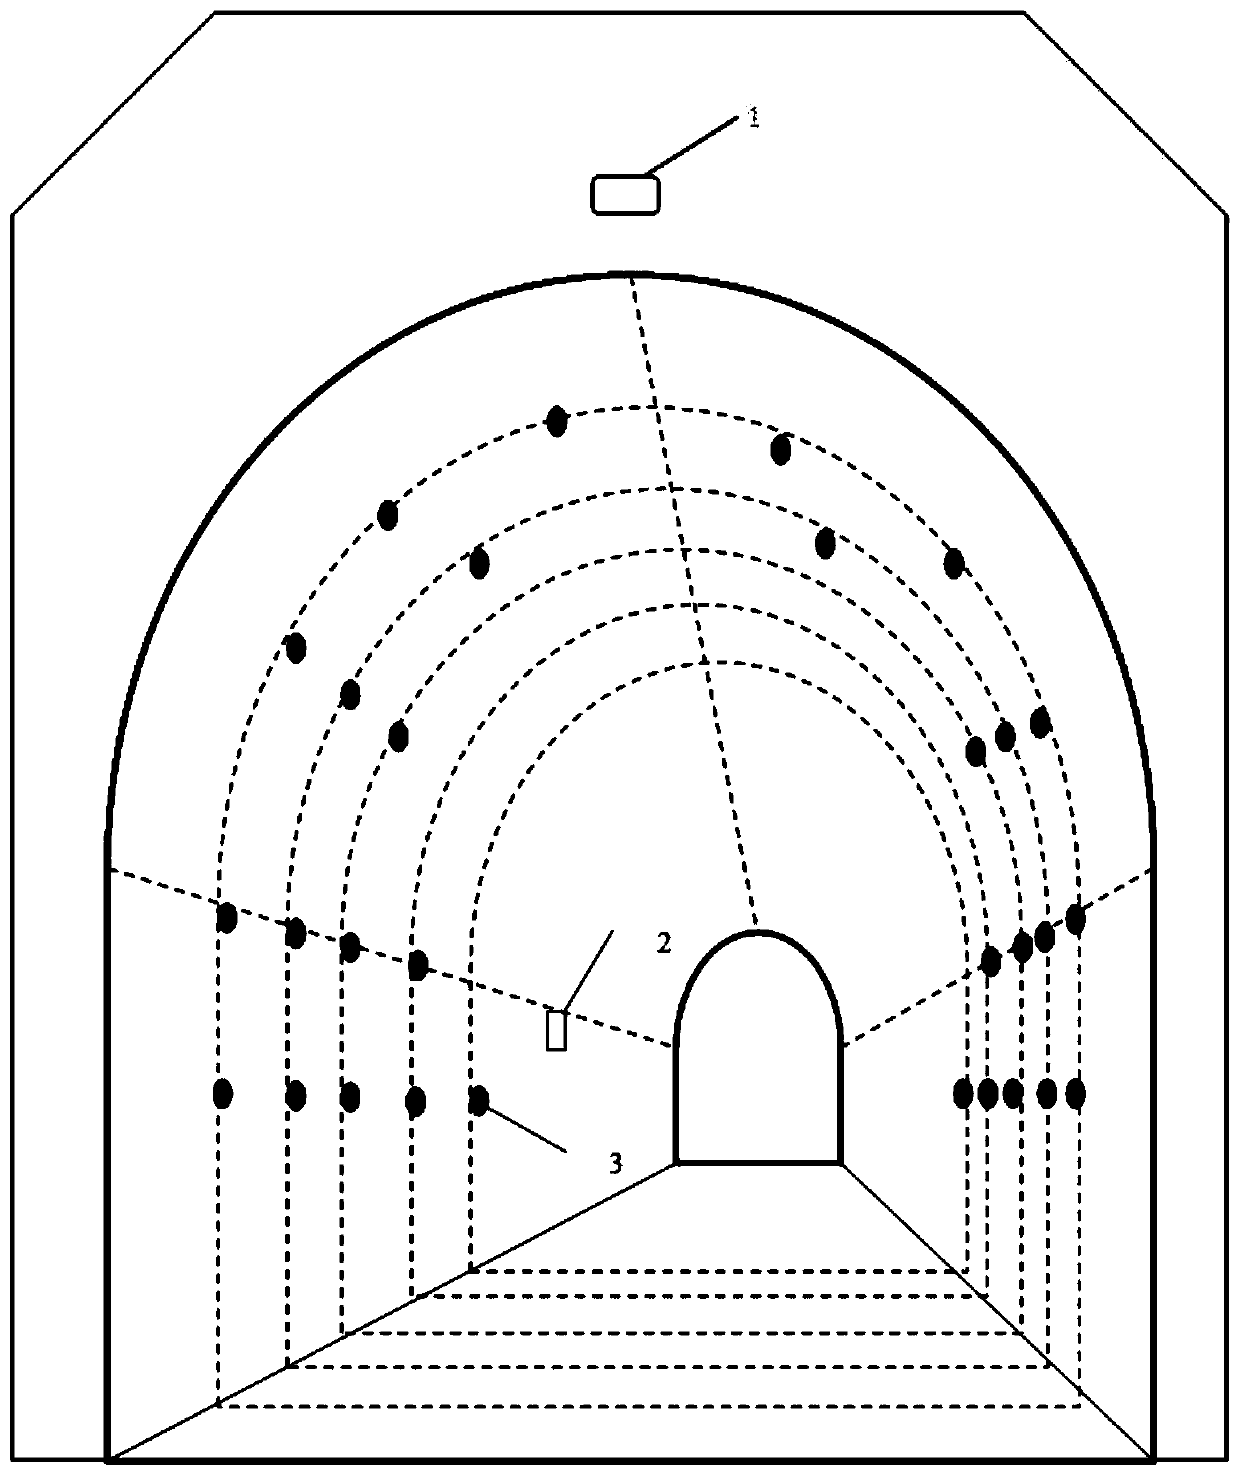 Improved highway tunnel illumination assistant device